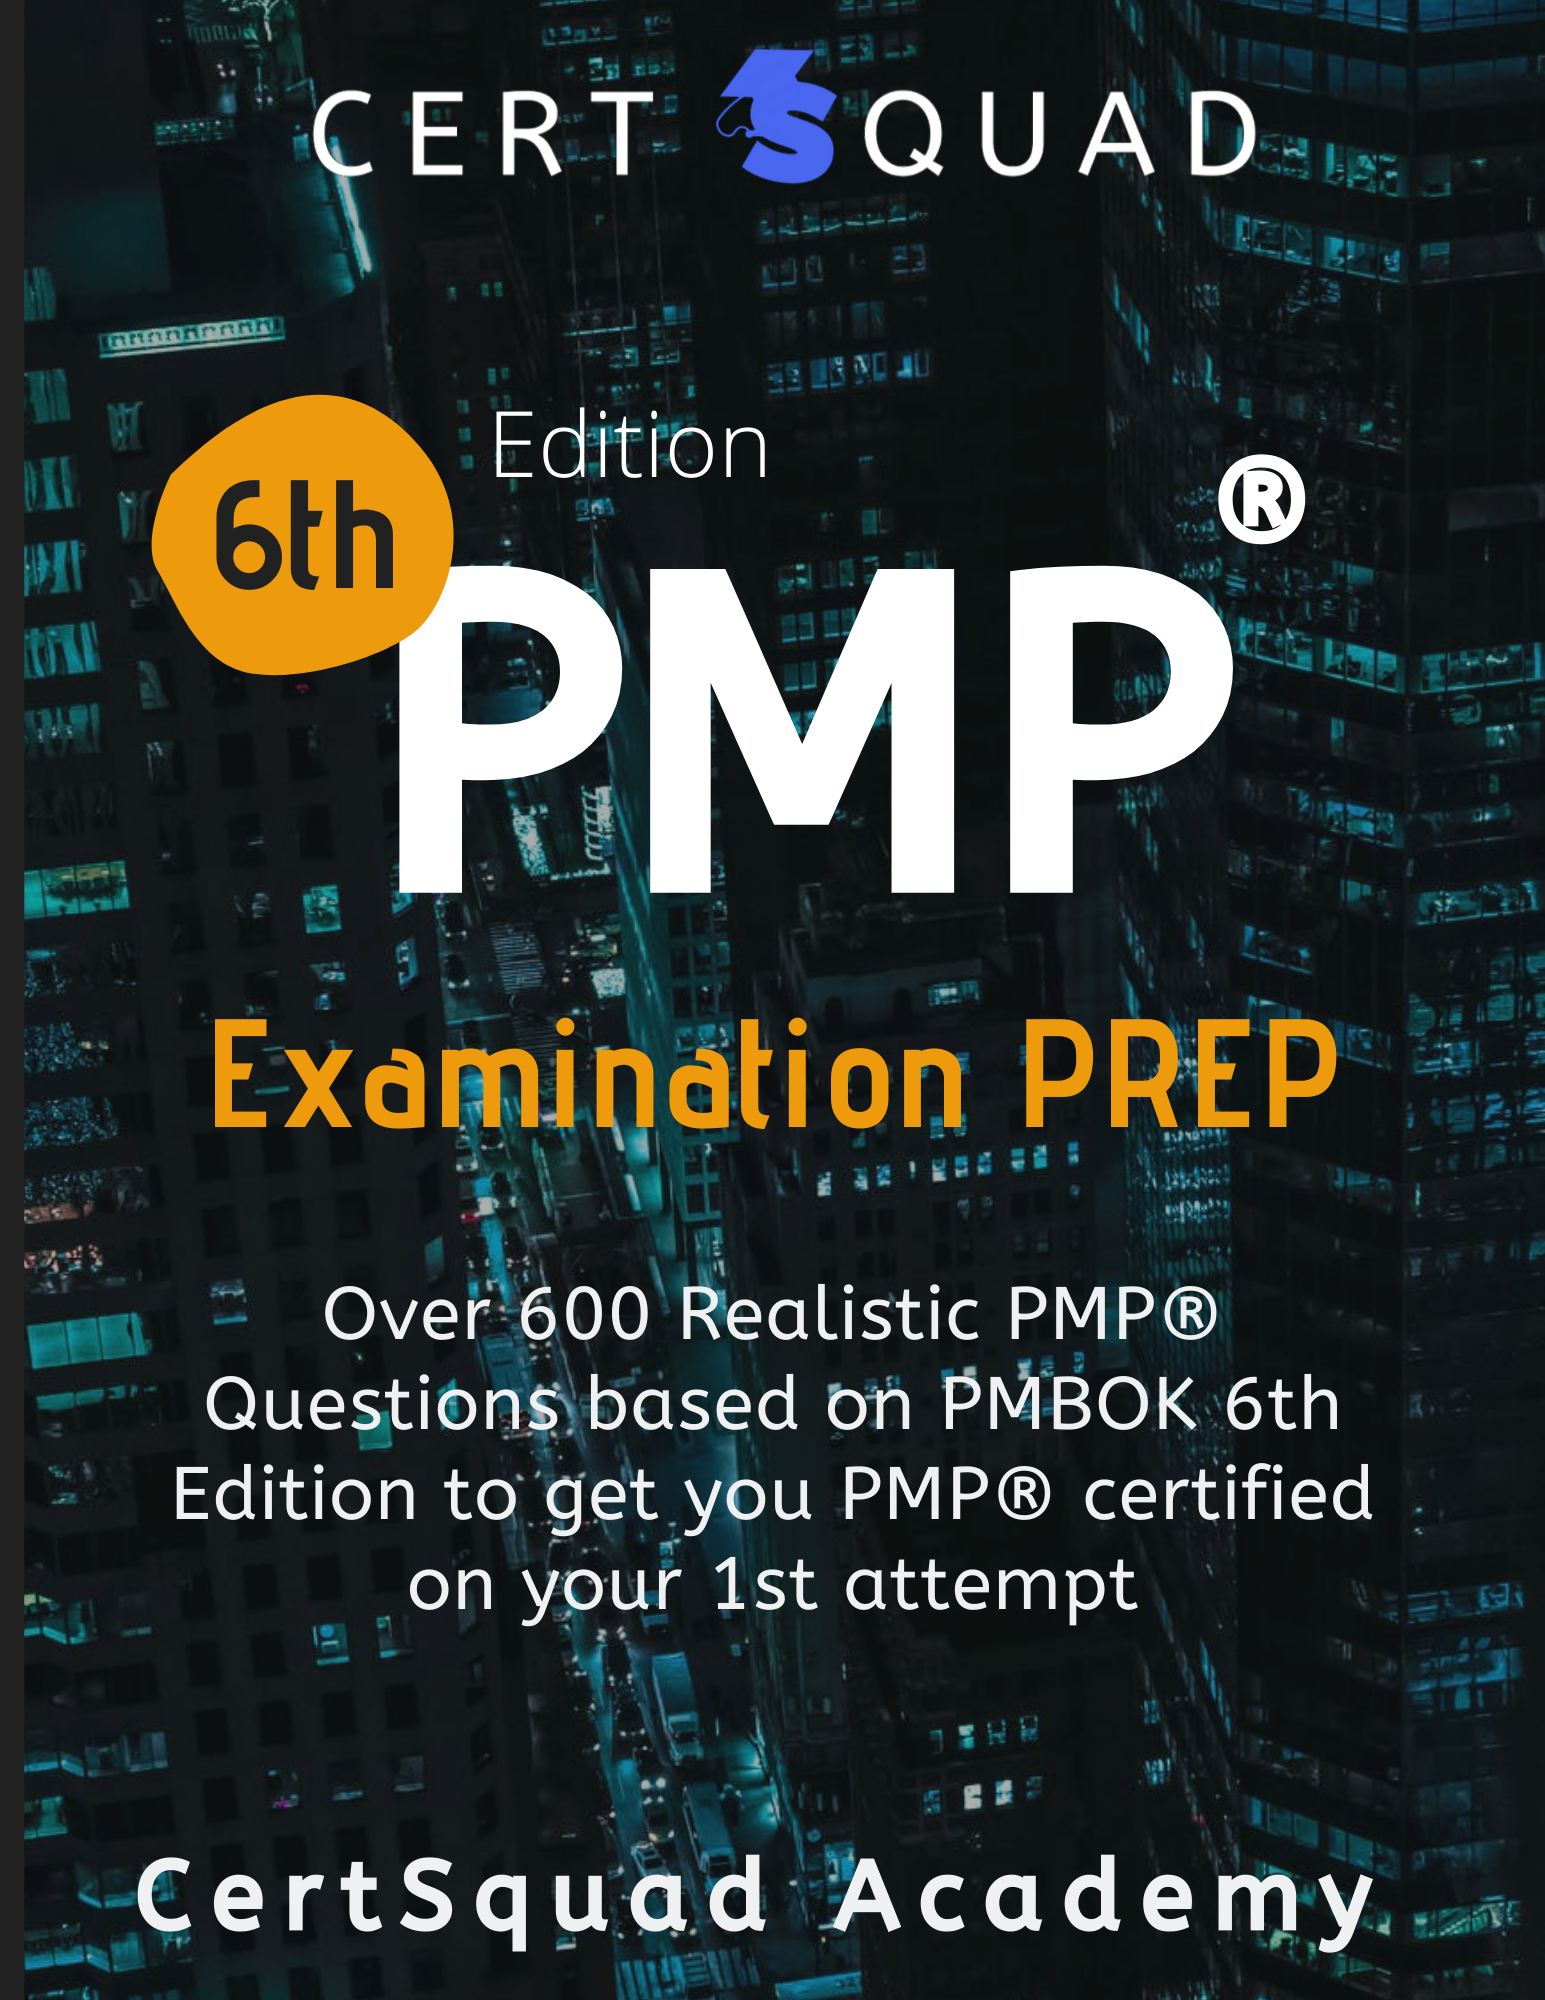 FREE: PMP 6th Edition Examination Prep: Over 600 Realistic Questions aligned to PMBOK 6th Edition by CertSquad Academy